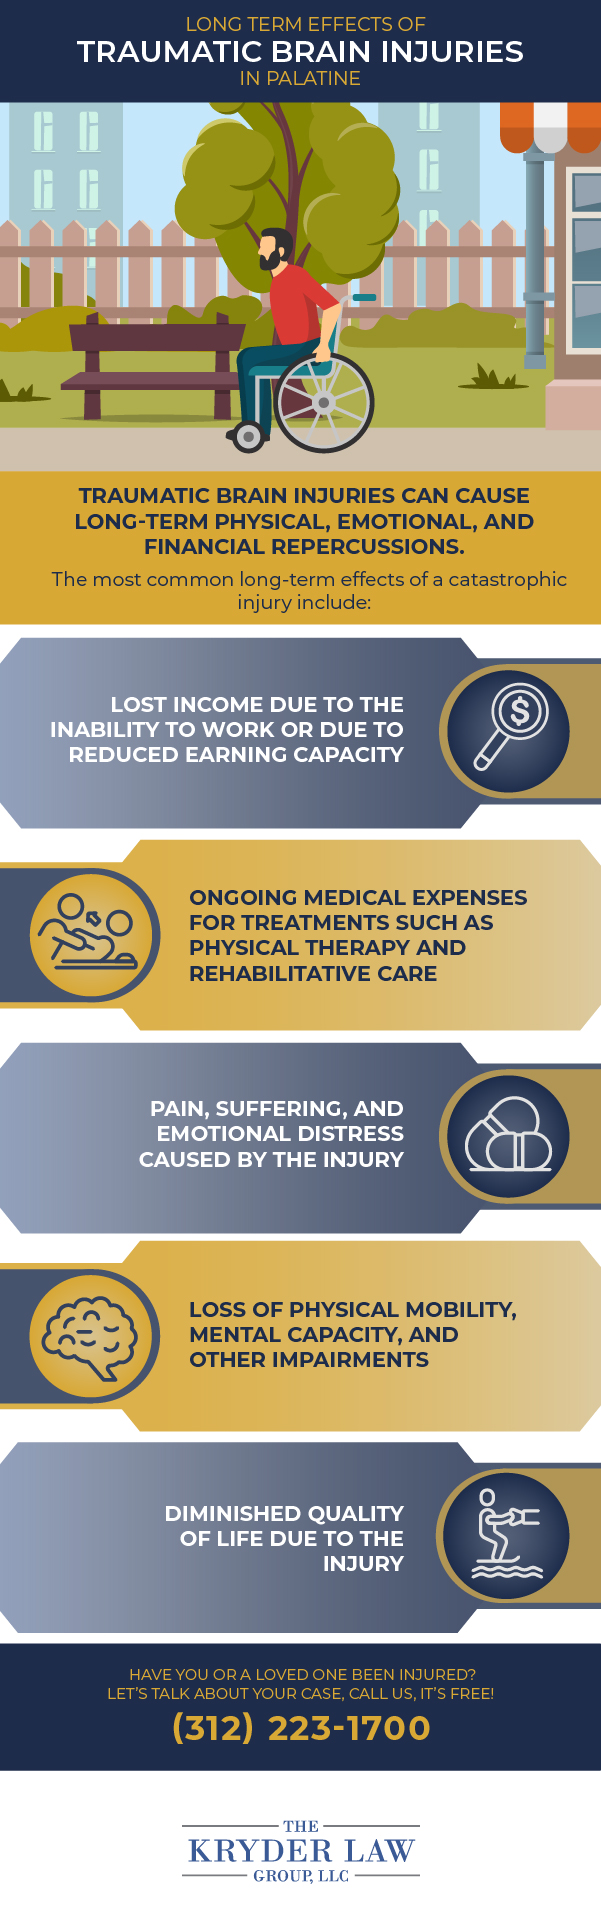 Long Term Effects of Traumatic Brain Injuries in Palatine Infographic